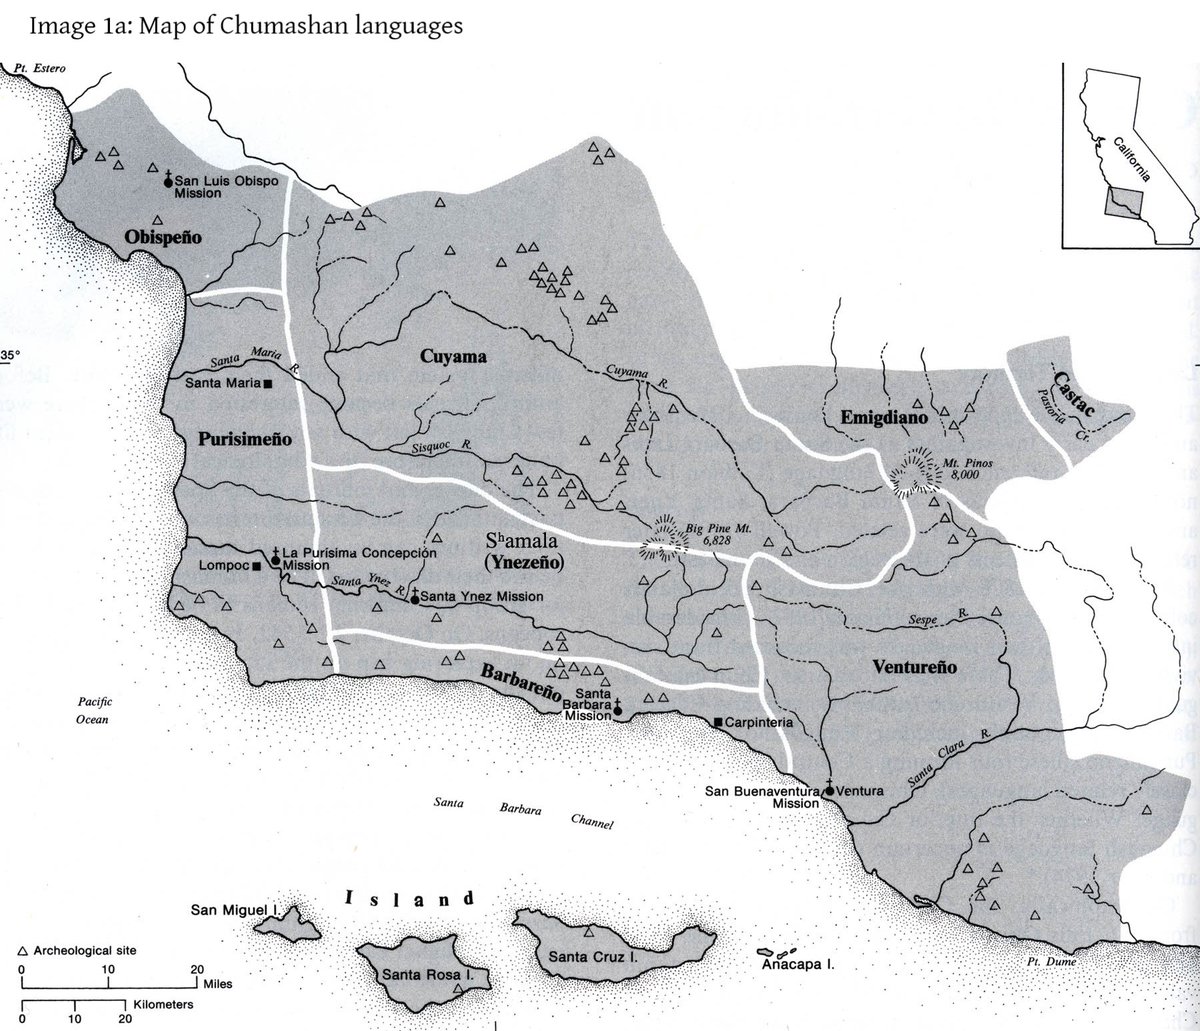 1/12 “Fragmented languages: Reconstructing the Purisimeño fricative”Purisimeño (PUY) is a Chumash language previously spoken along the central California coast. It was documented by John Peabody Harrington (JPH) in the early 1900’s.  @wieldorg  #FragmentedLanguageWorkshop2020